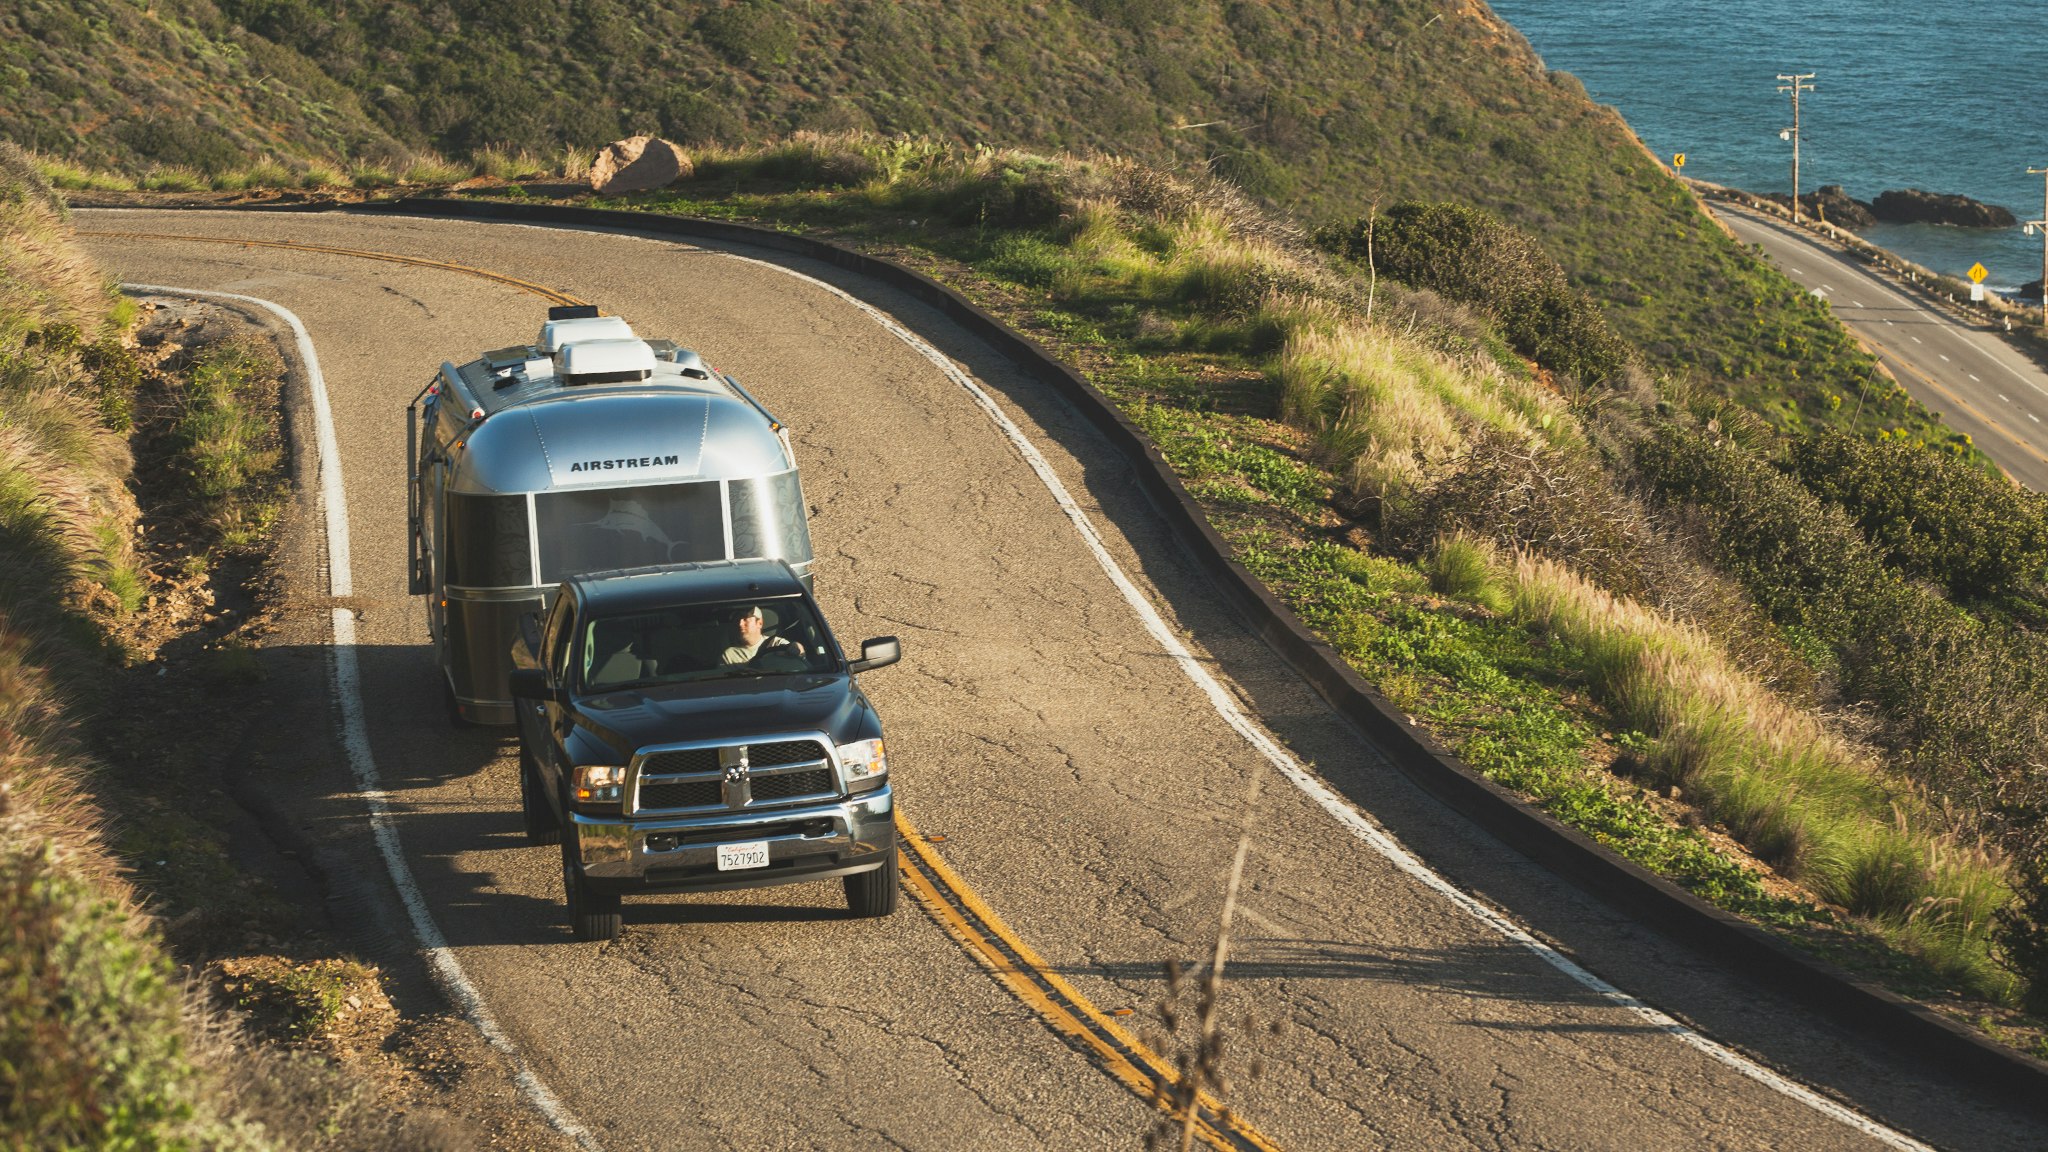 Planning a Summer RV Vacation: For Airstreamers or Anyone - Airstream